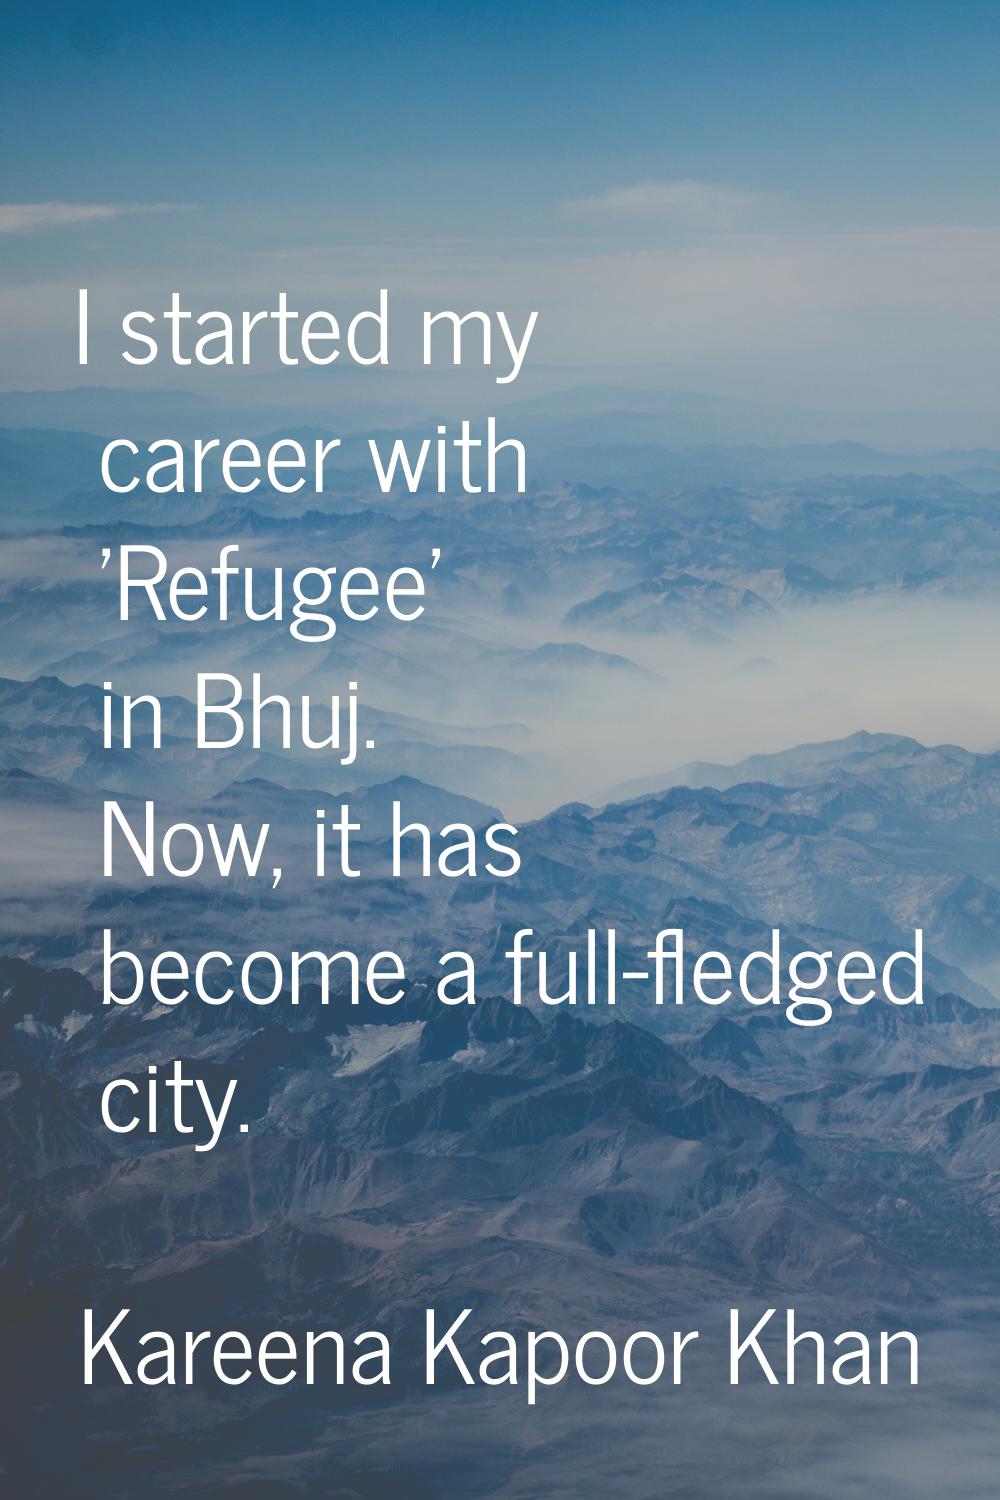 I started my career with 'Refugee' in Bhuj. Now, it has become a full-fledged city.